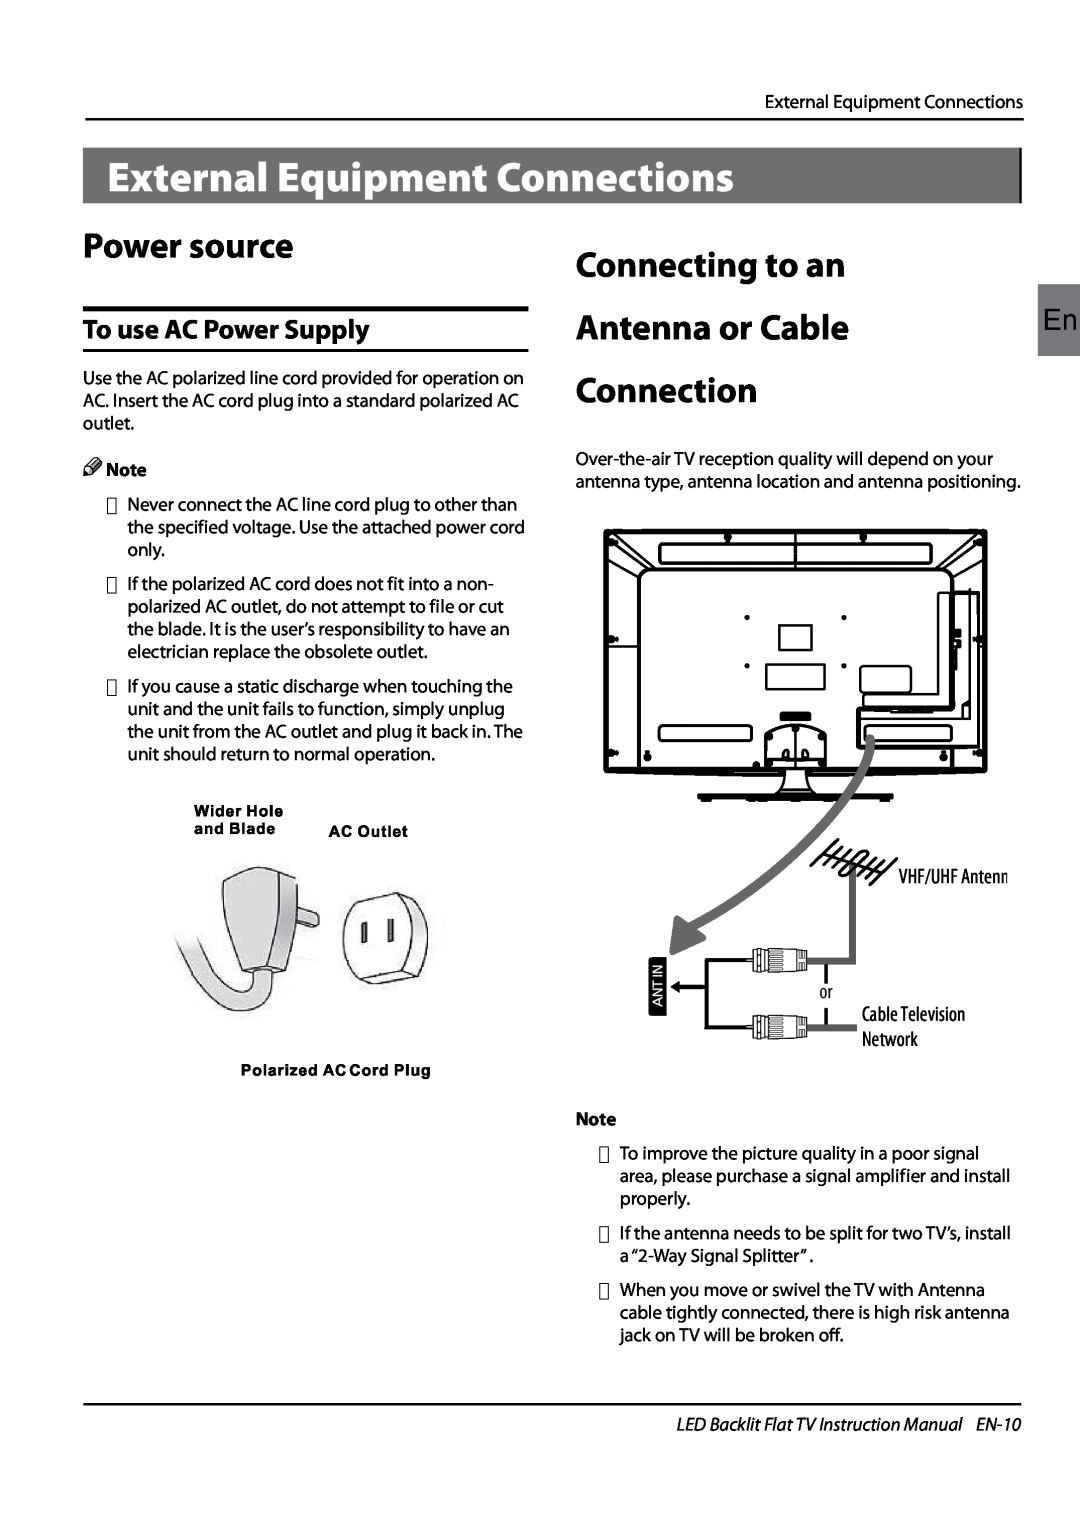 Haier LE42H5000 External Equipment Connections, Power source, Connecting to an, Antenna or Cable, To use AC Power Supply 